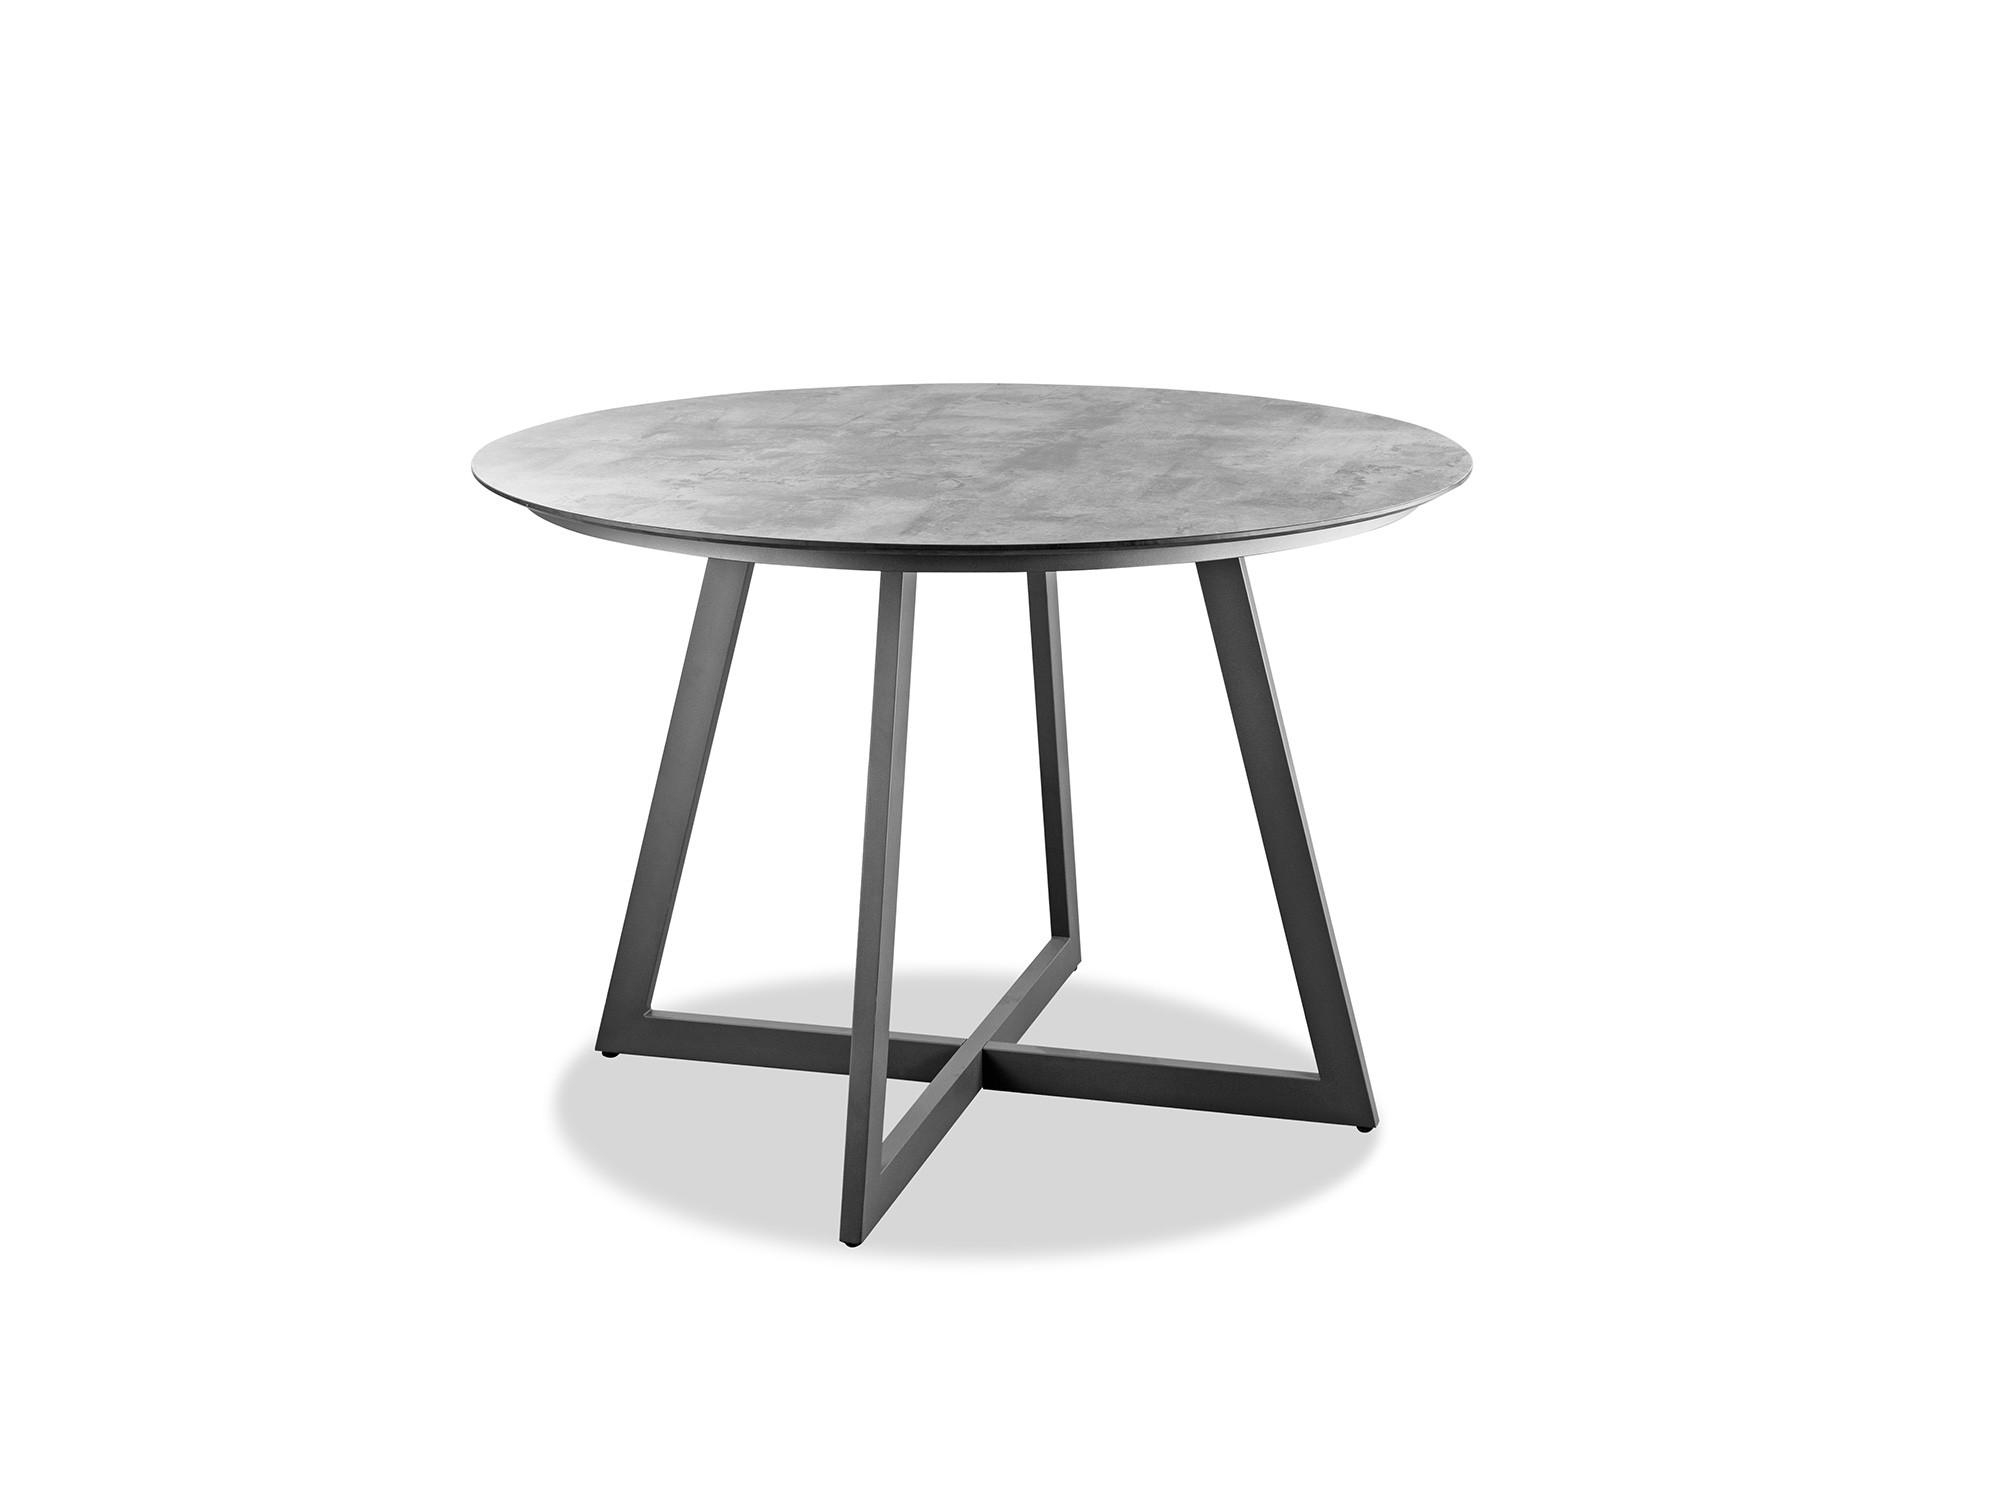 Contemporary Outdoor Dining Table Rain ODT1580 in Gray 